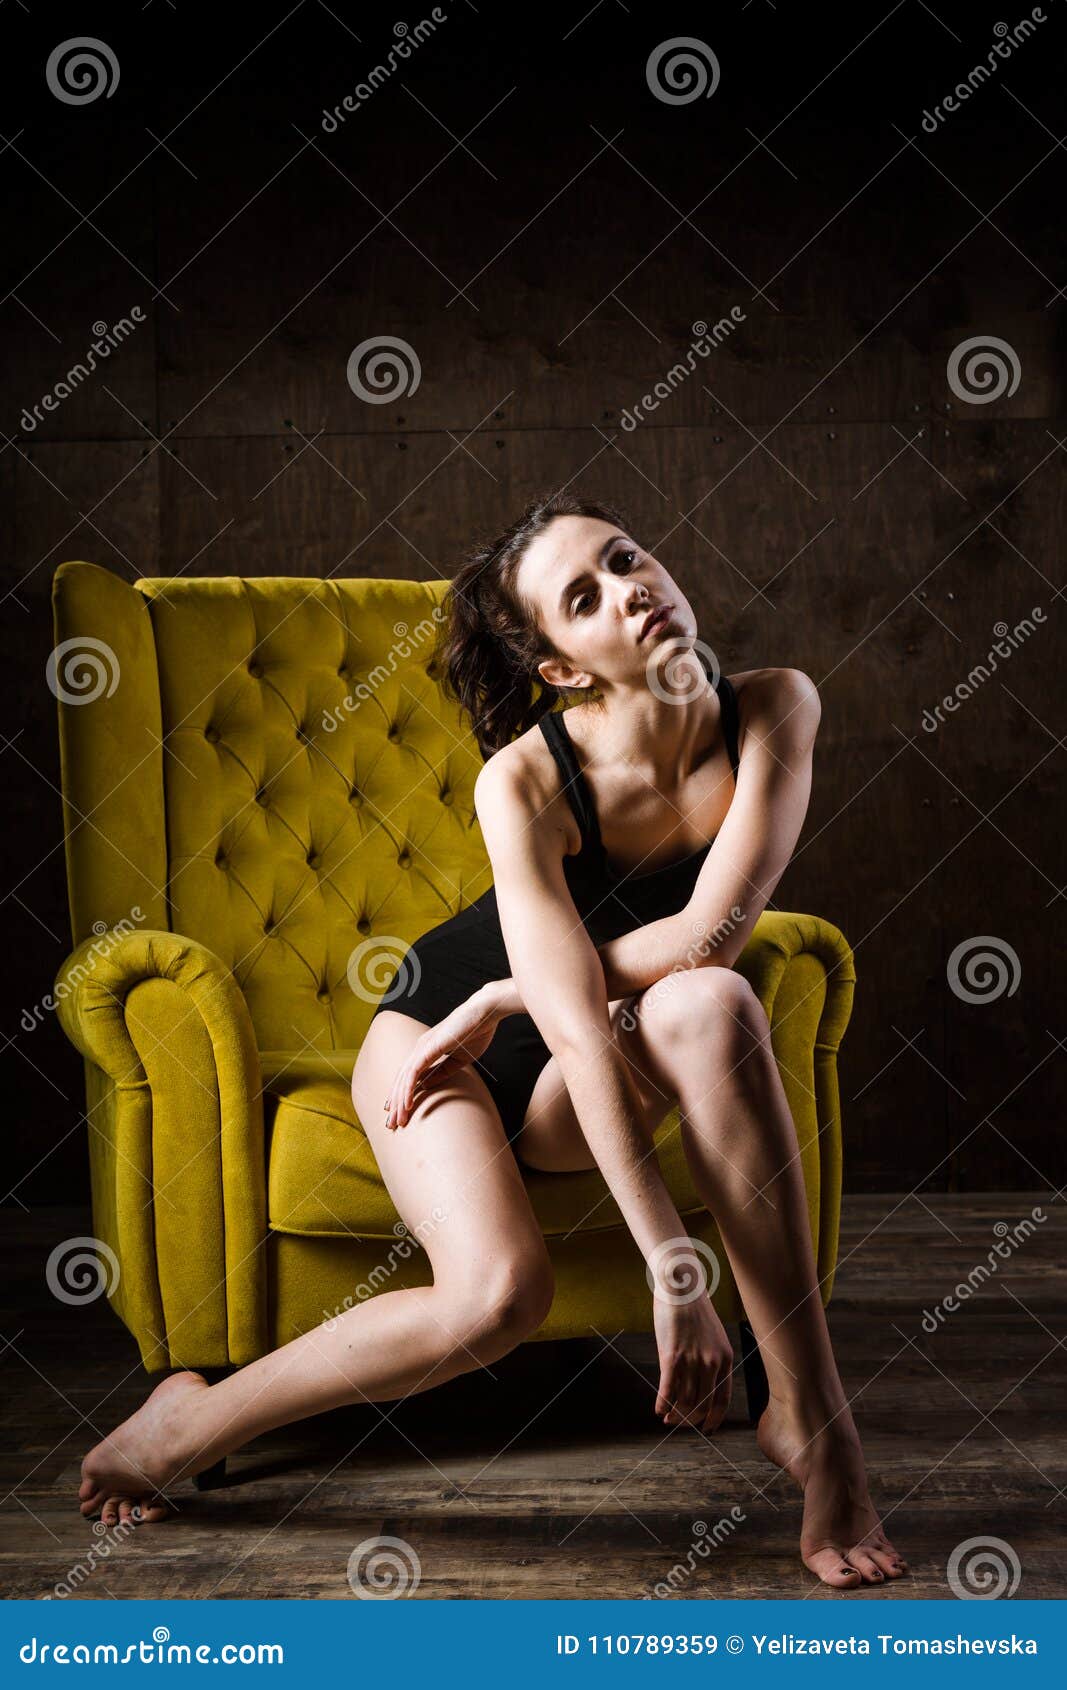 Young Beautiful, Caucasian Woman with a Thin Figure and Long Bare Legs, Barefoot Posing Sitting on a Yellow Chair in the Inte Stock Image